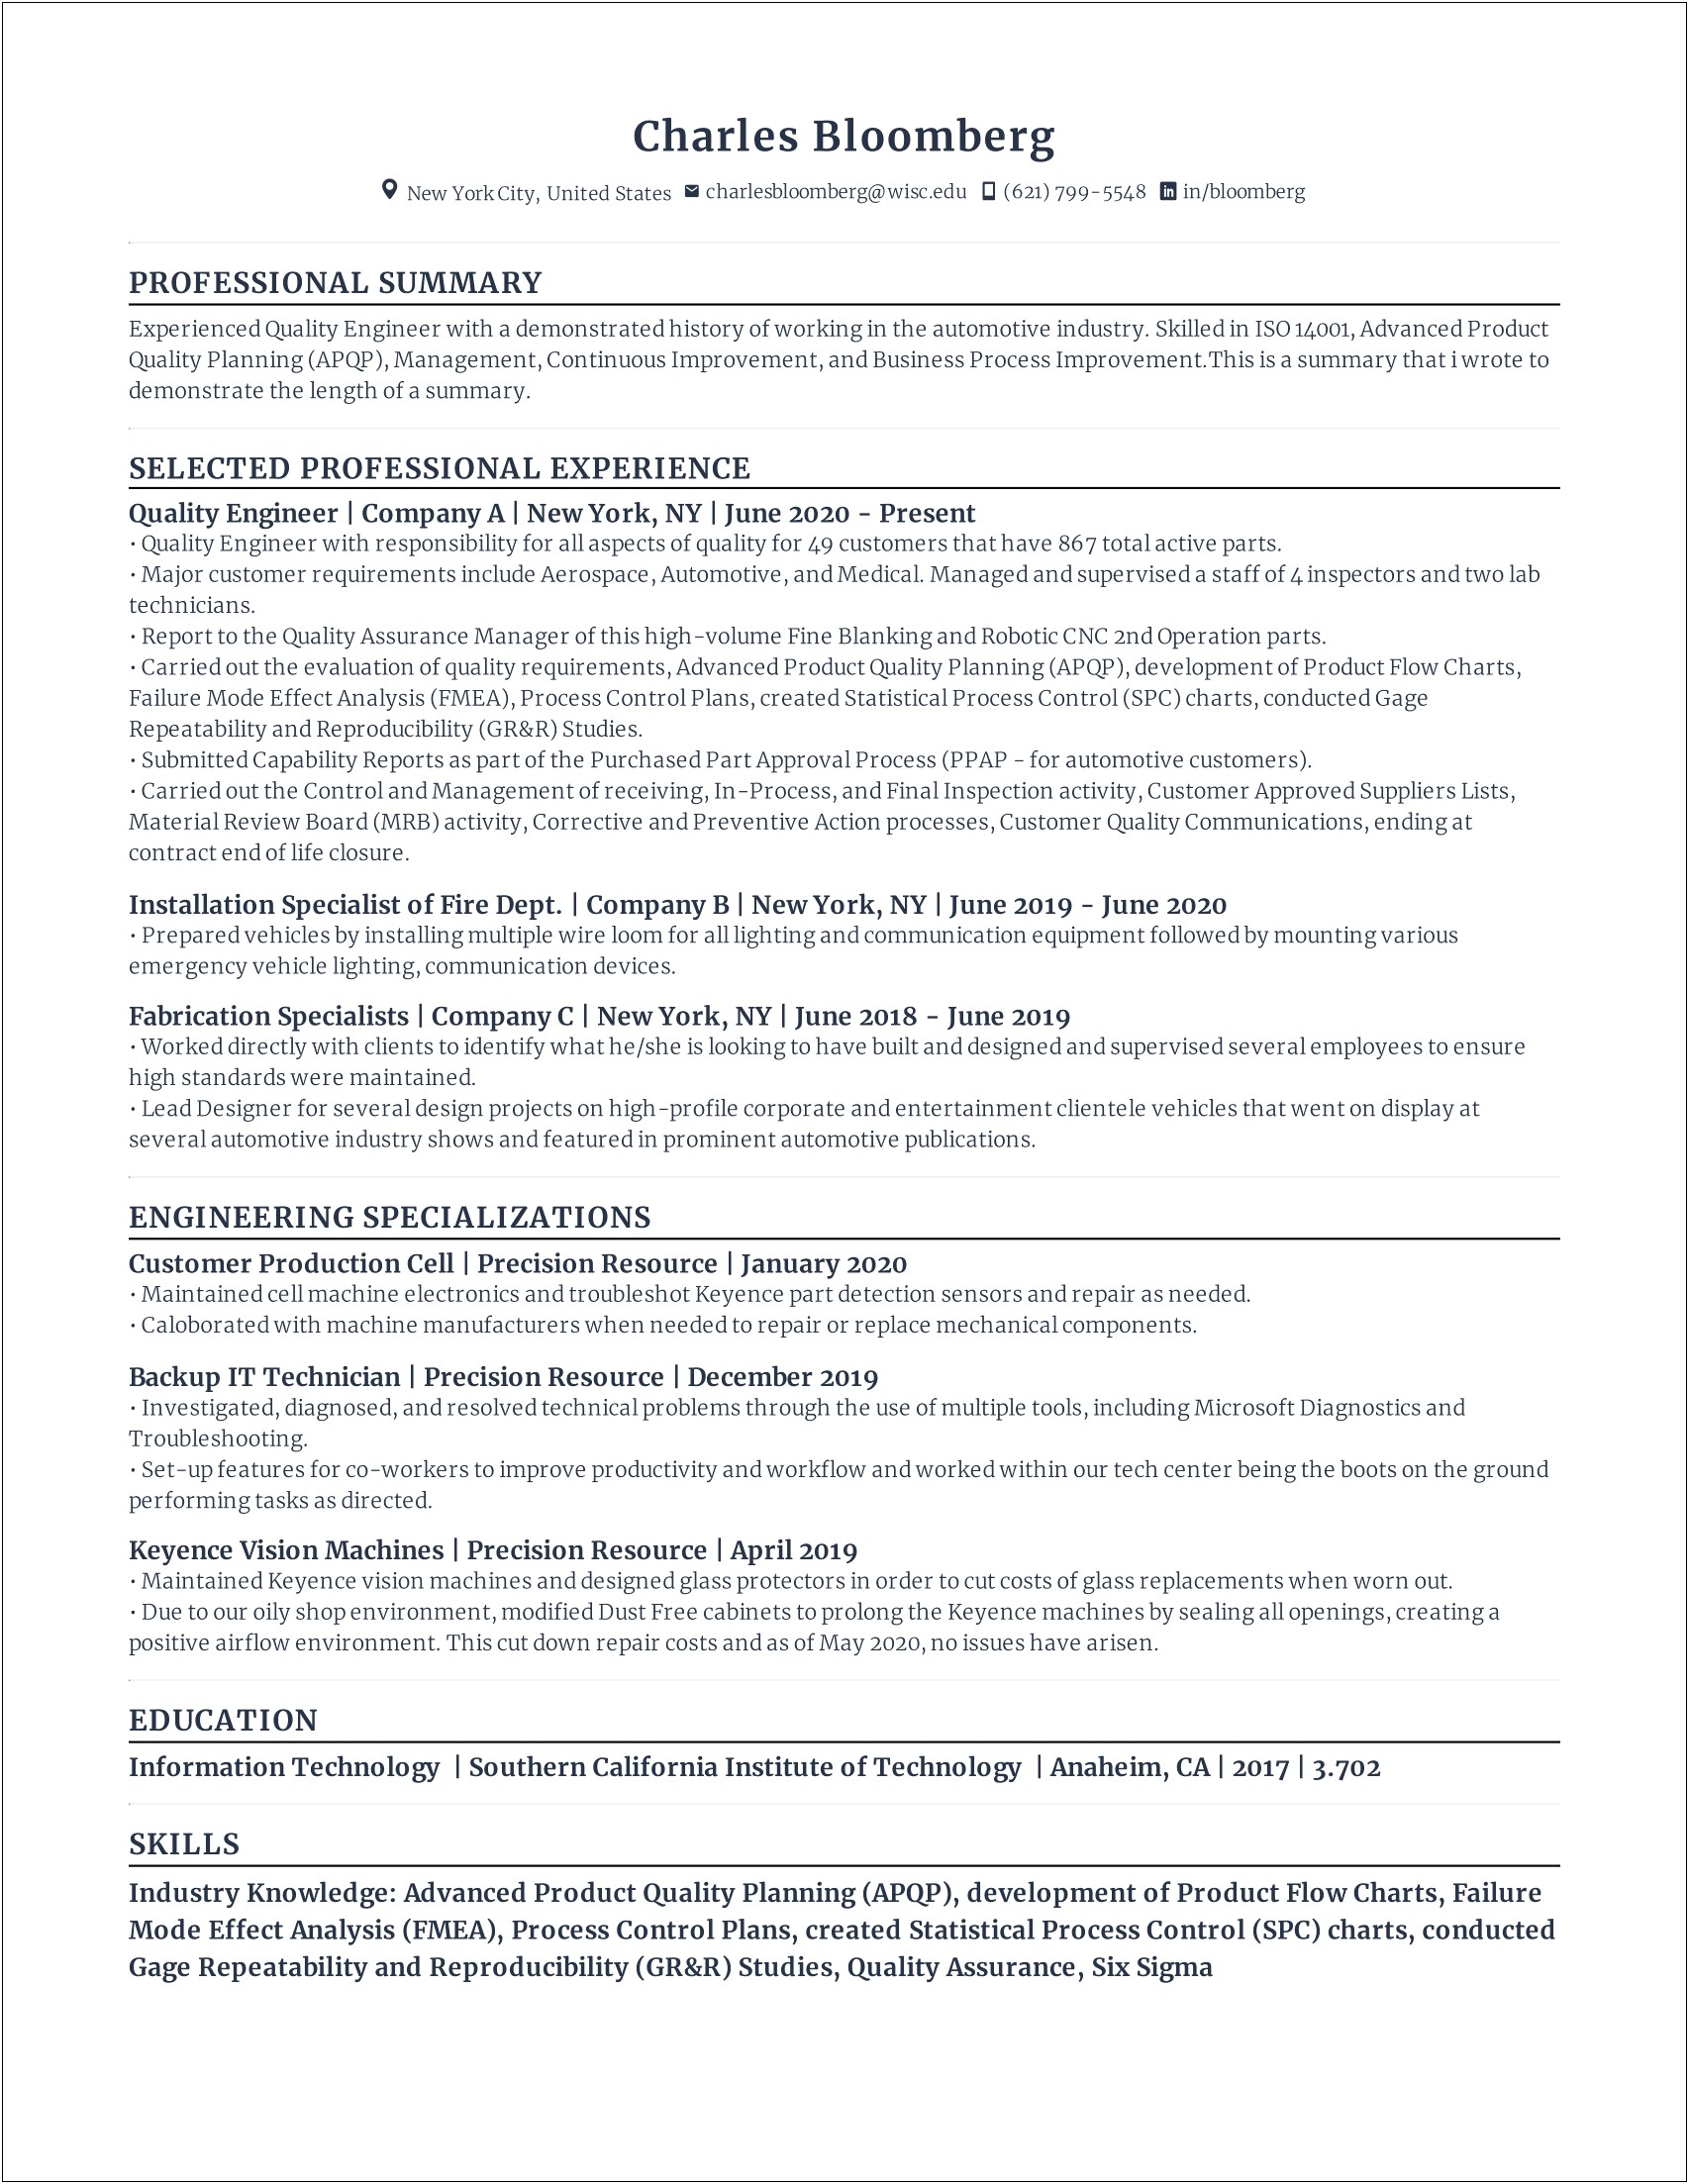 Sample Resume For Quality Engineer In Automobile